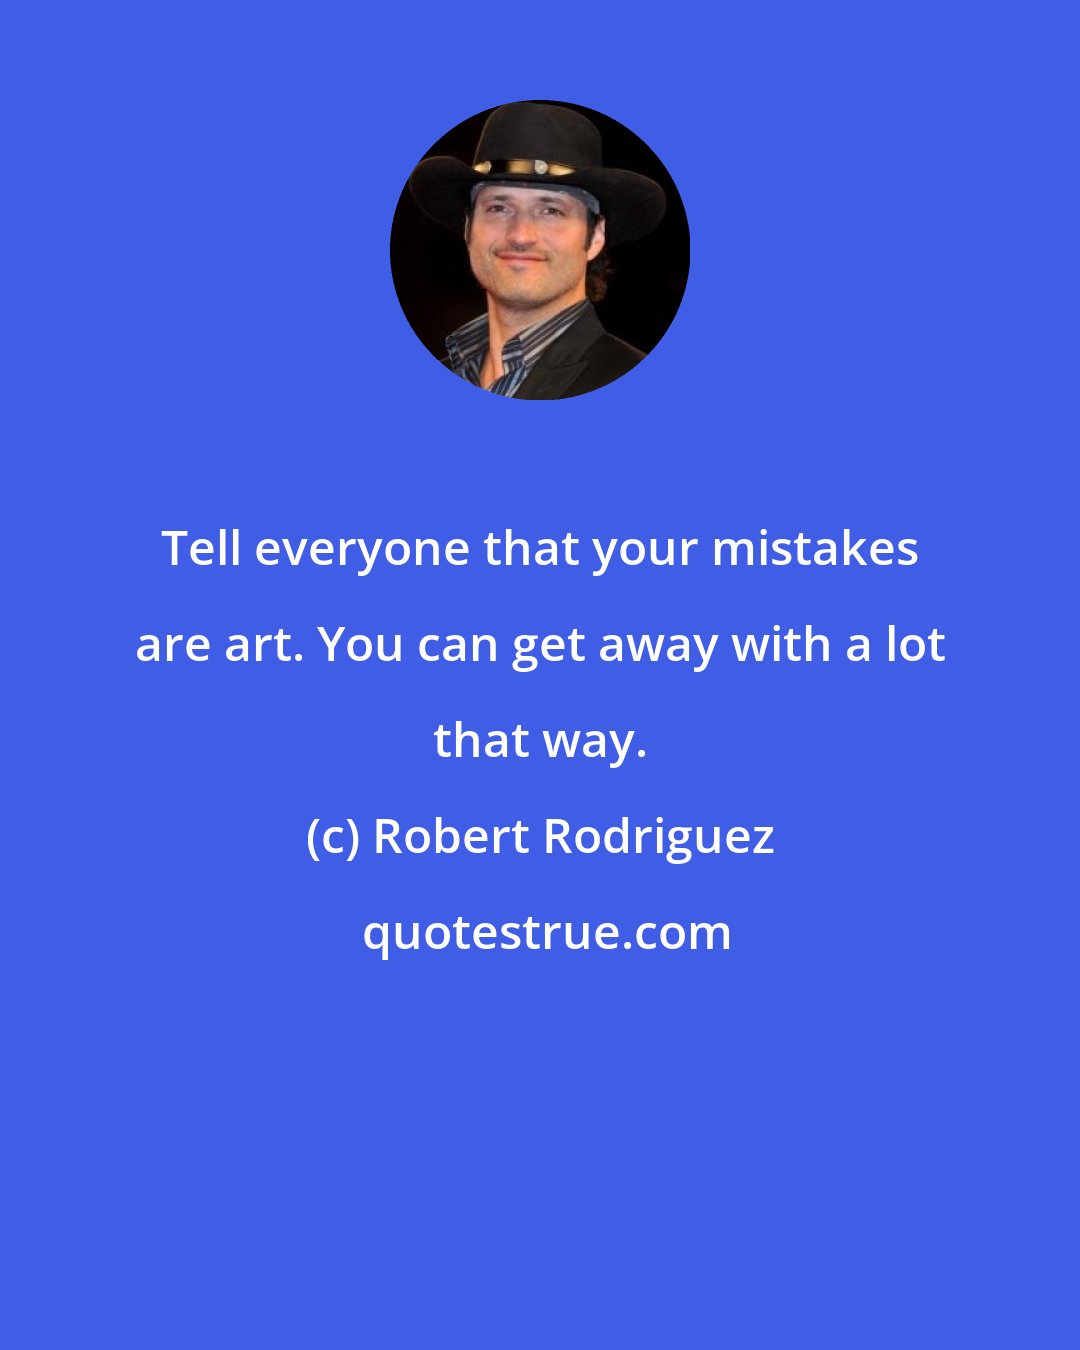 Robert Rodriguez: Tell everyone that your mistakes are art. You can get away with a lot that way.